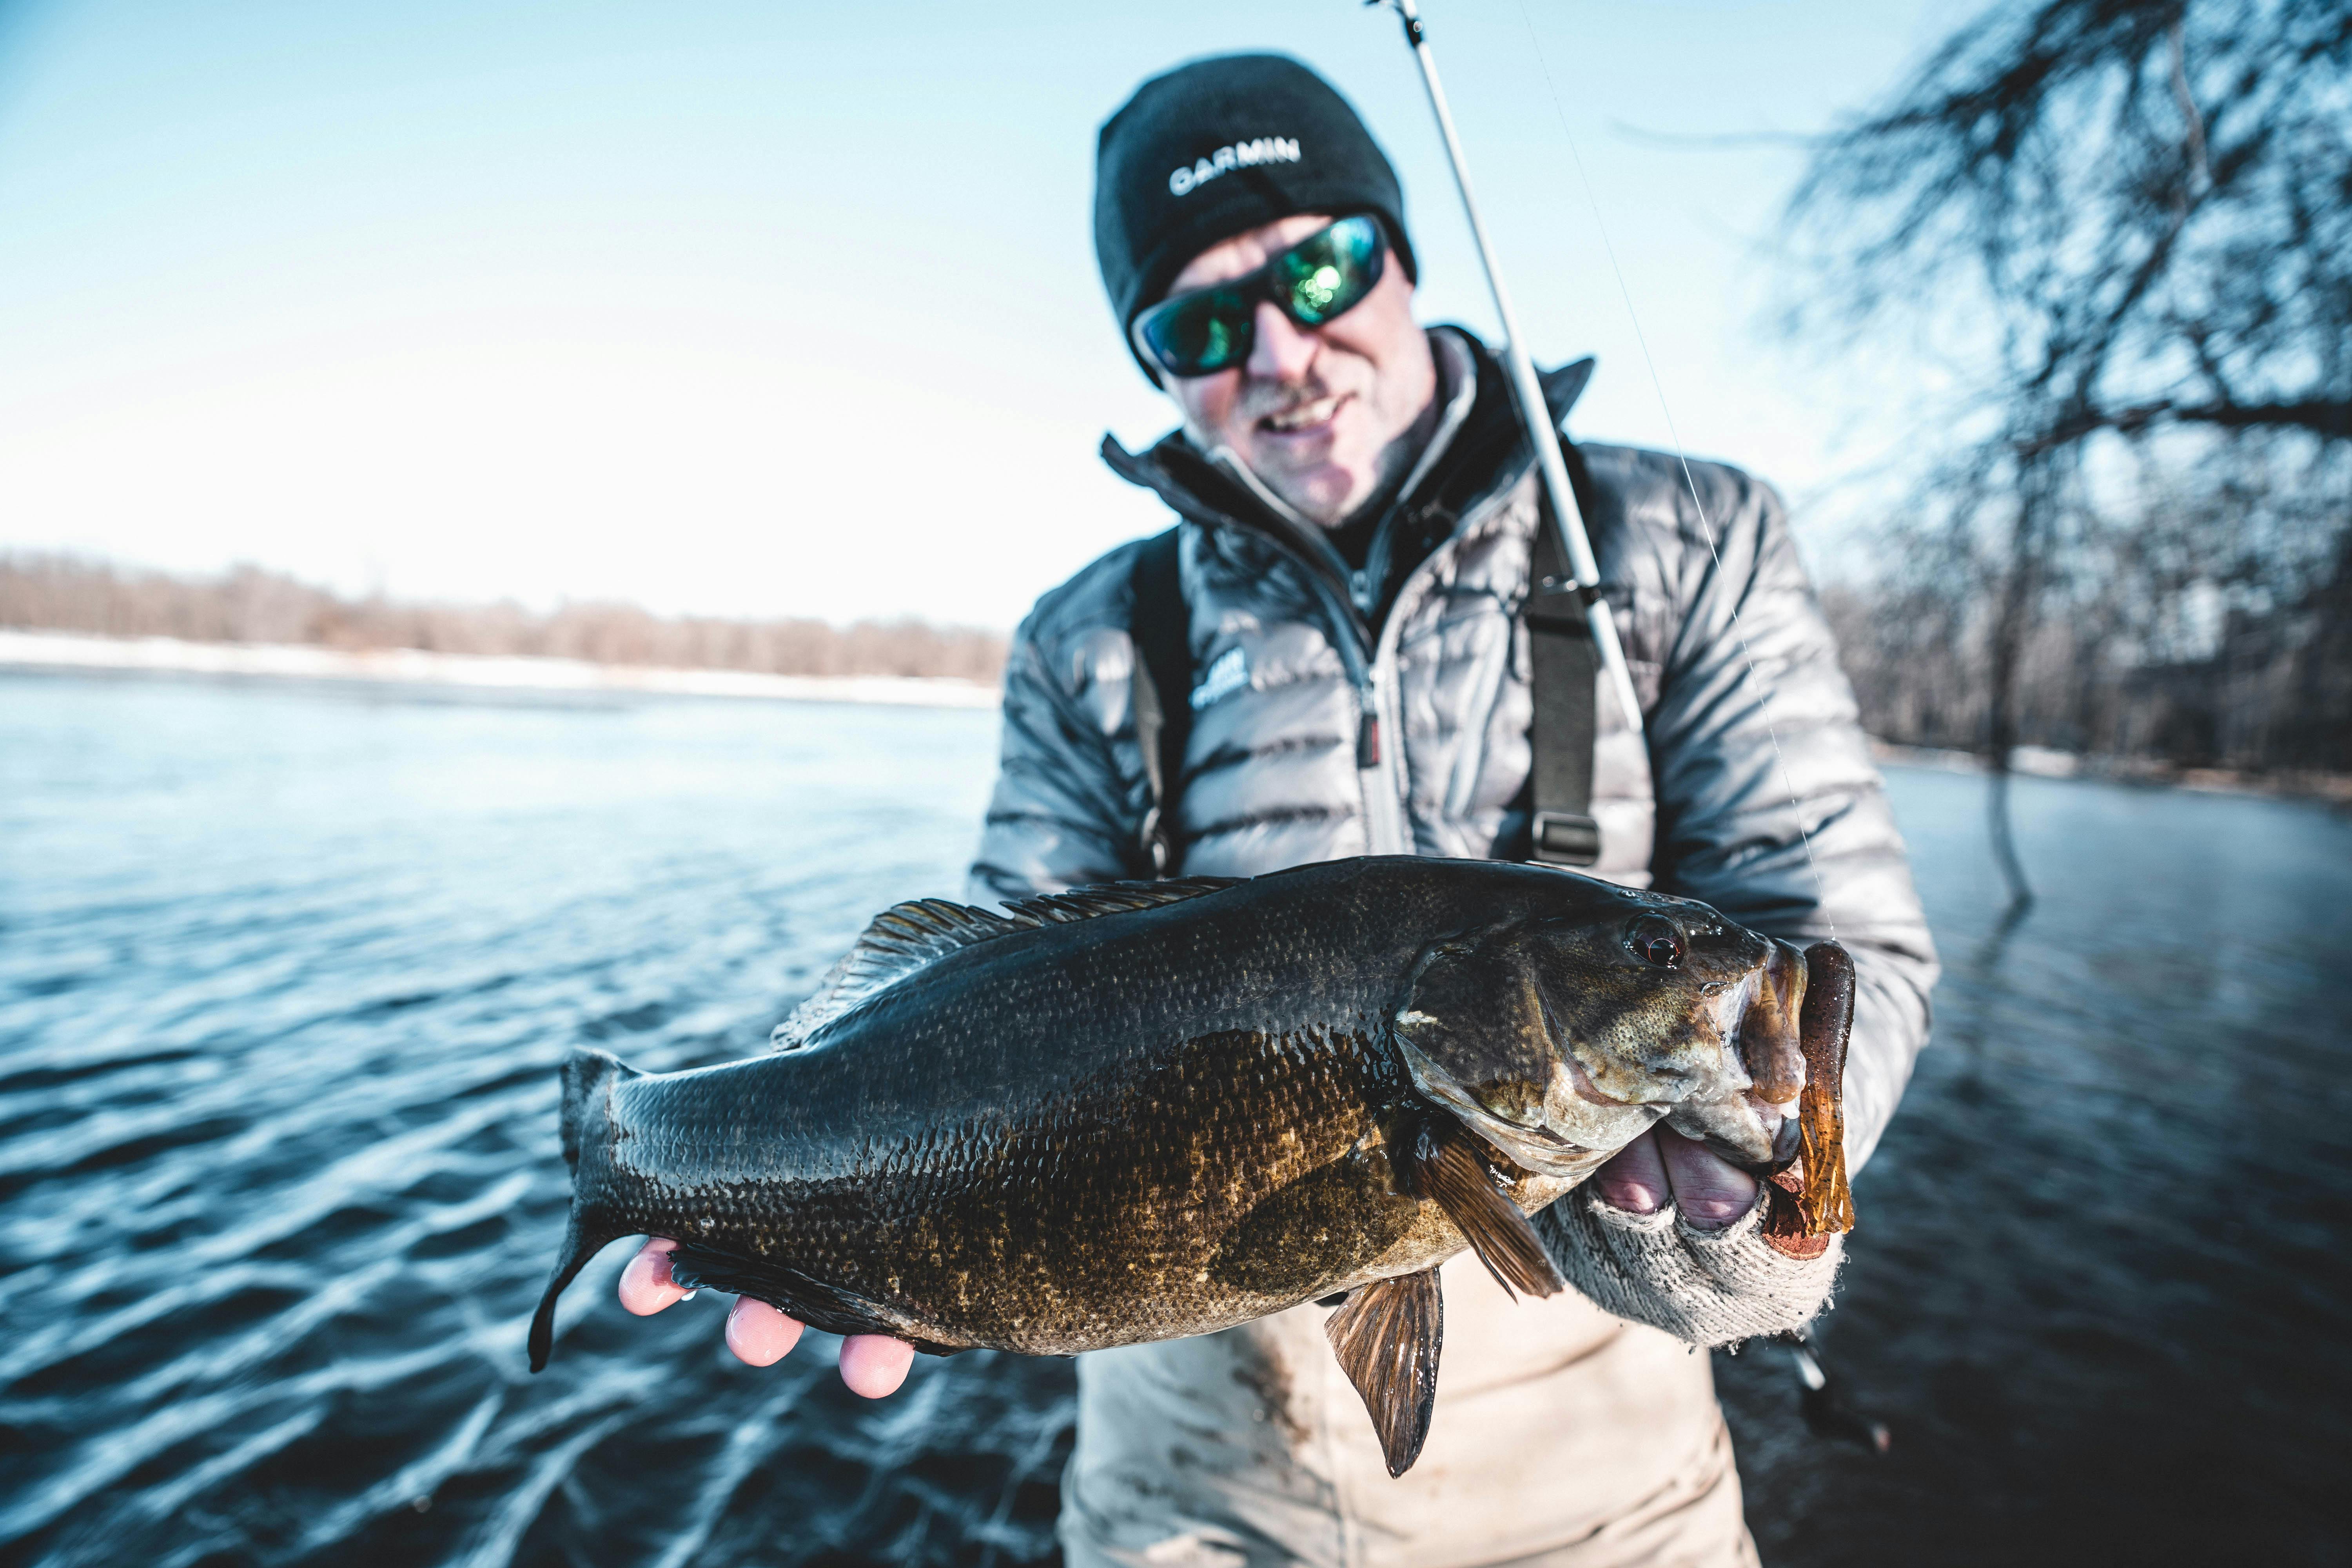 Hall of Fame Angler, Steve Pennaz shares an untraditional winter fishing  location and how to catch fish there.